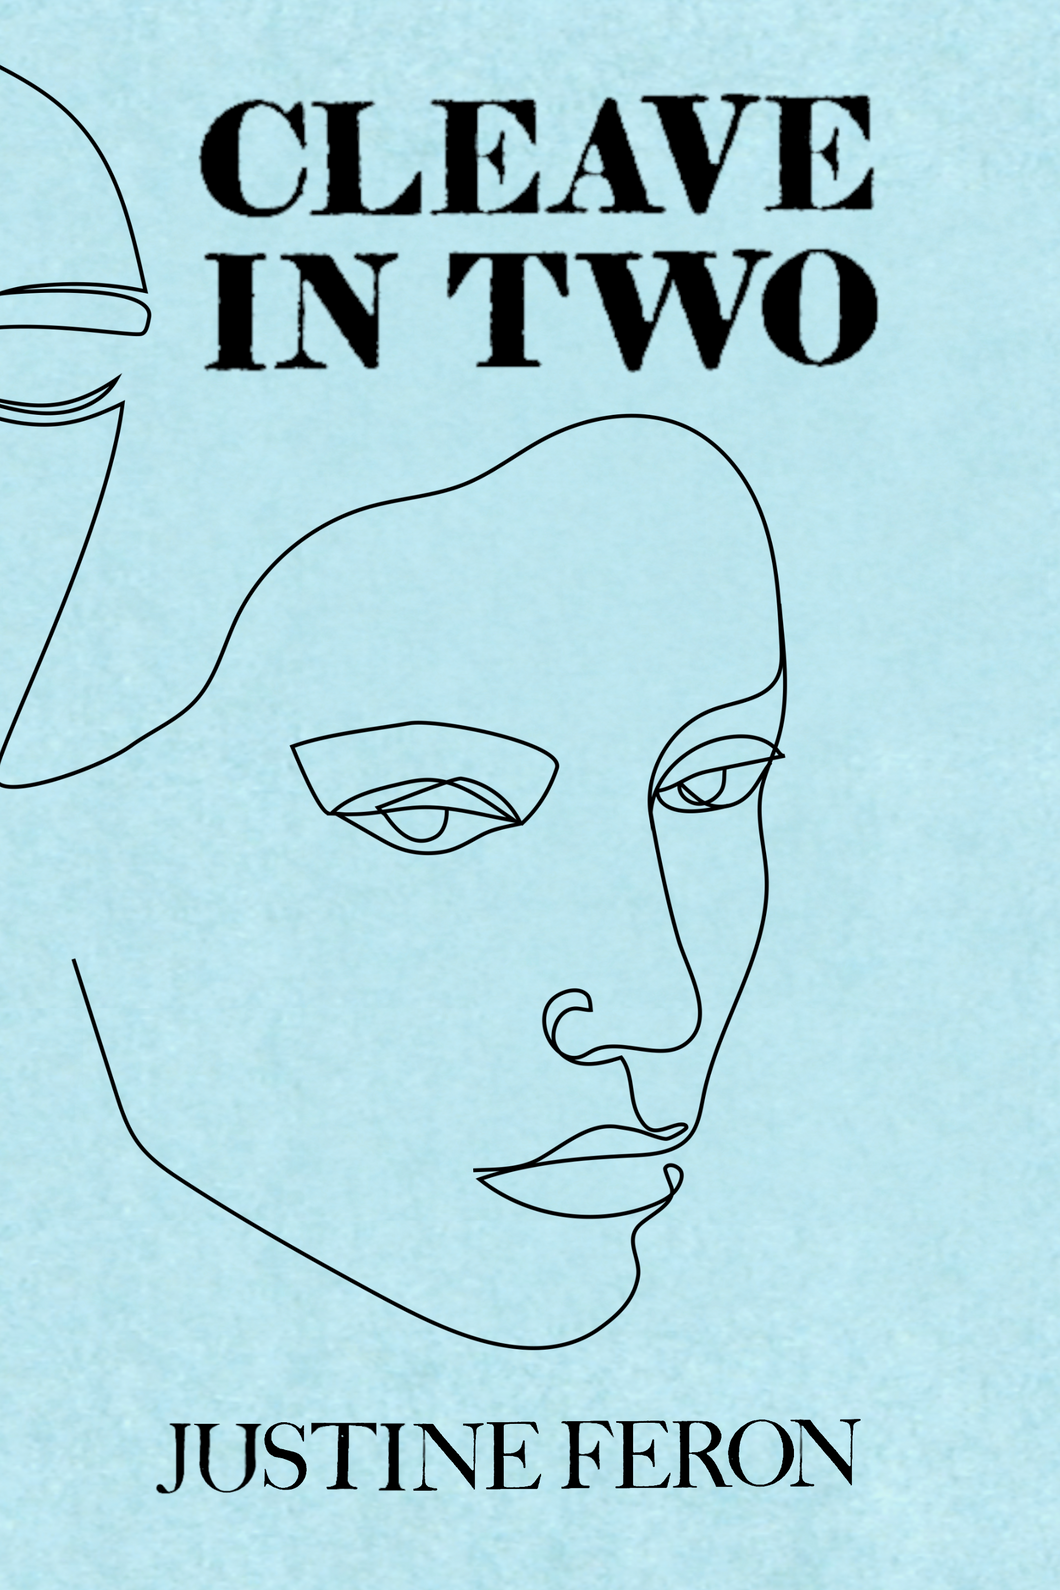 Cleave in Two, by Justine Feron-Print Books-Bottlecap Press